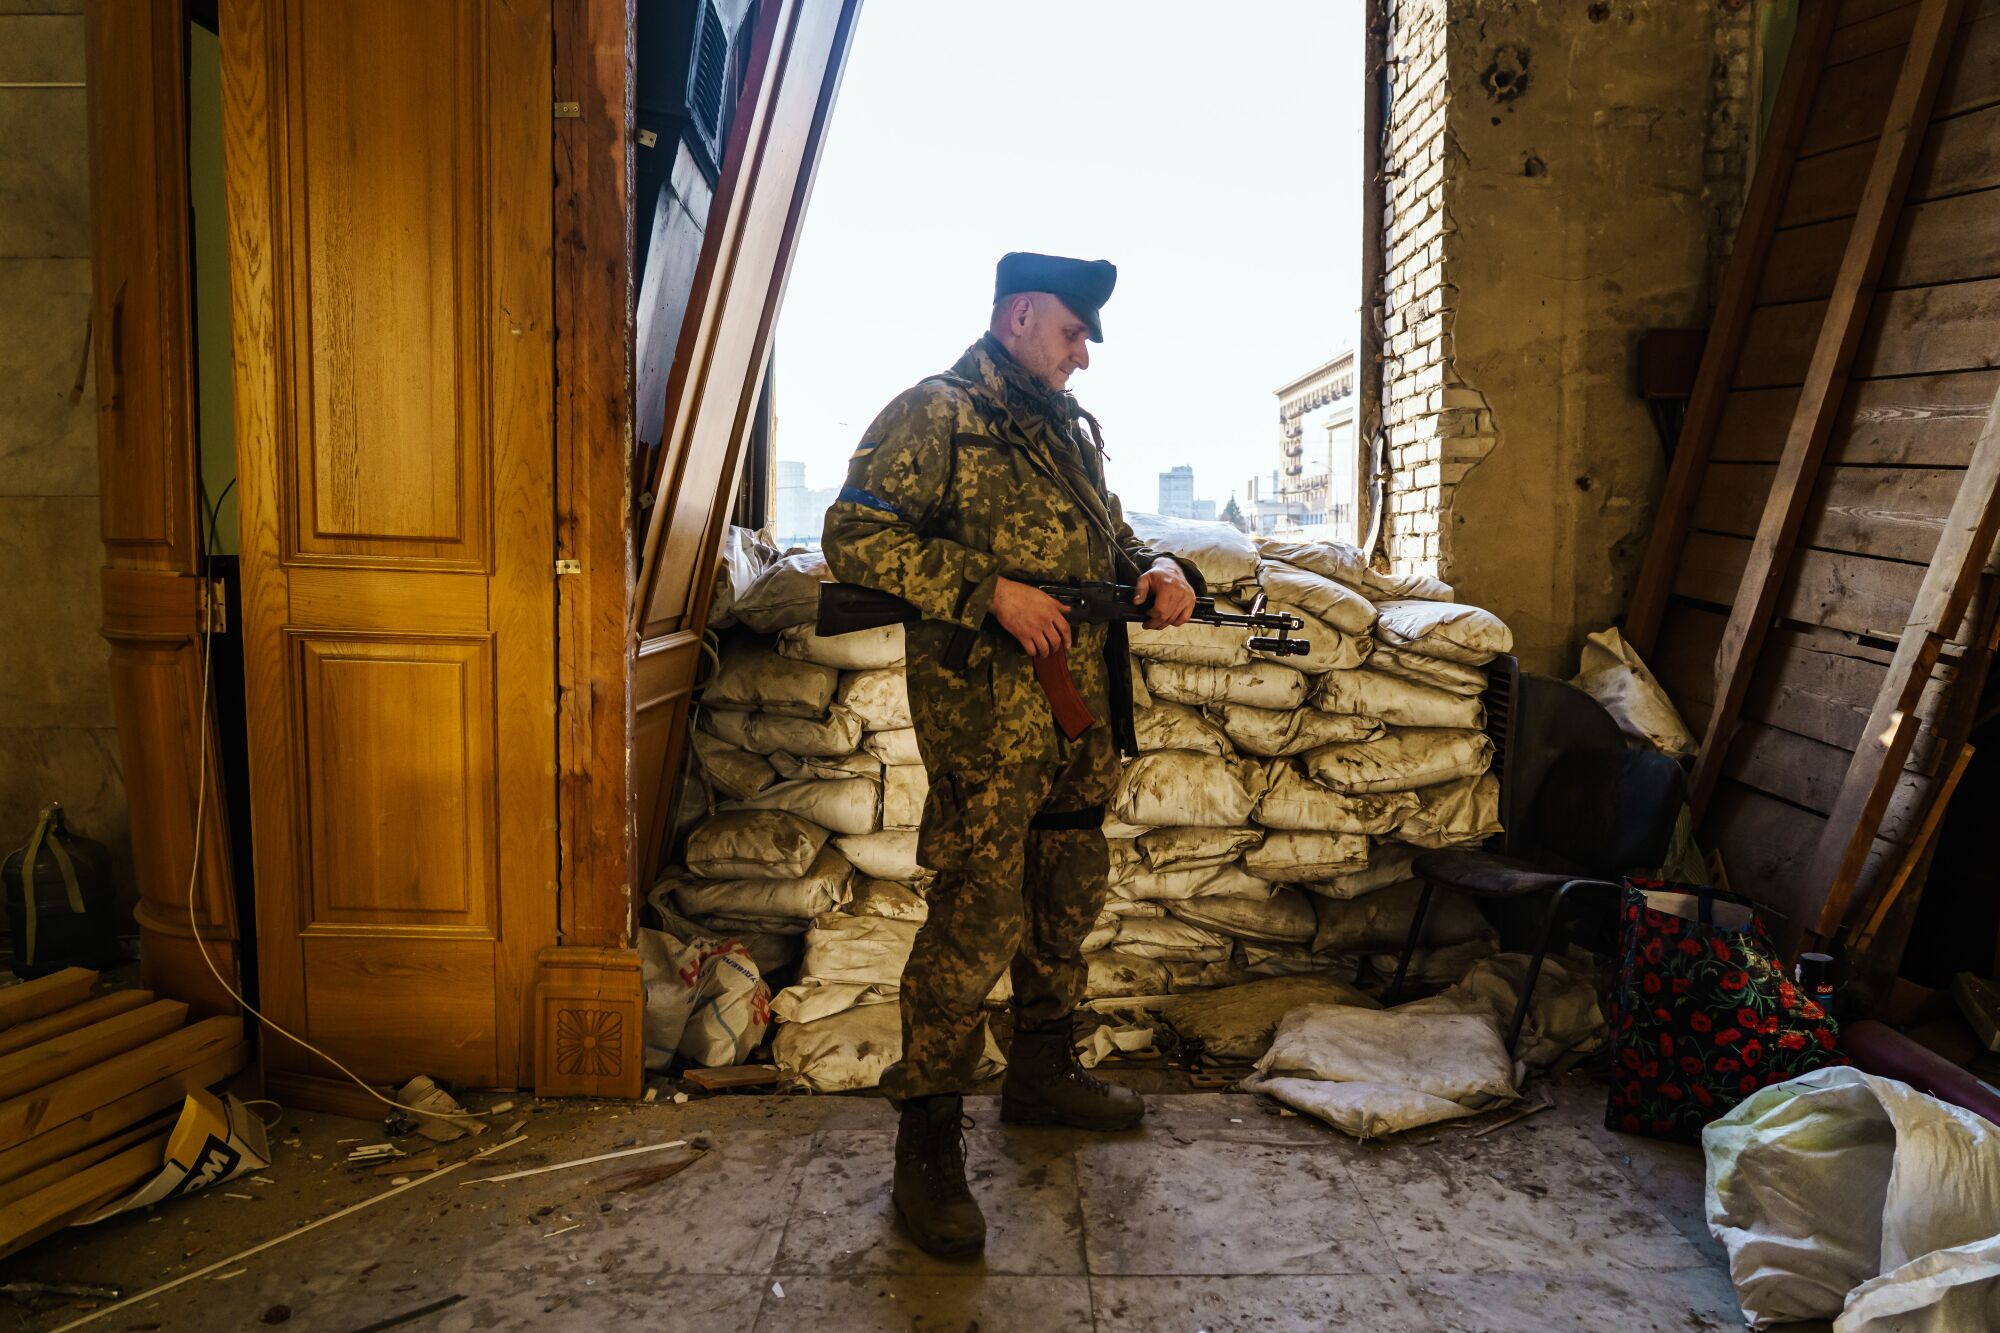 A male soldier in army fatigues armed with a rifle stands in a room with sandbags behind him in an entryway.